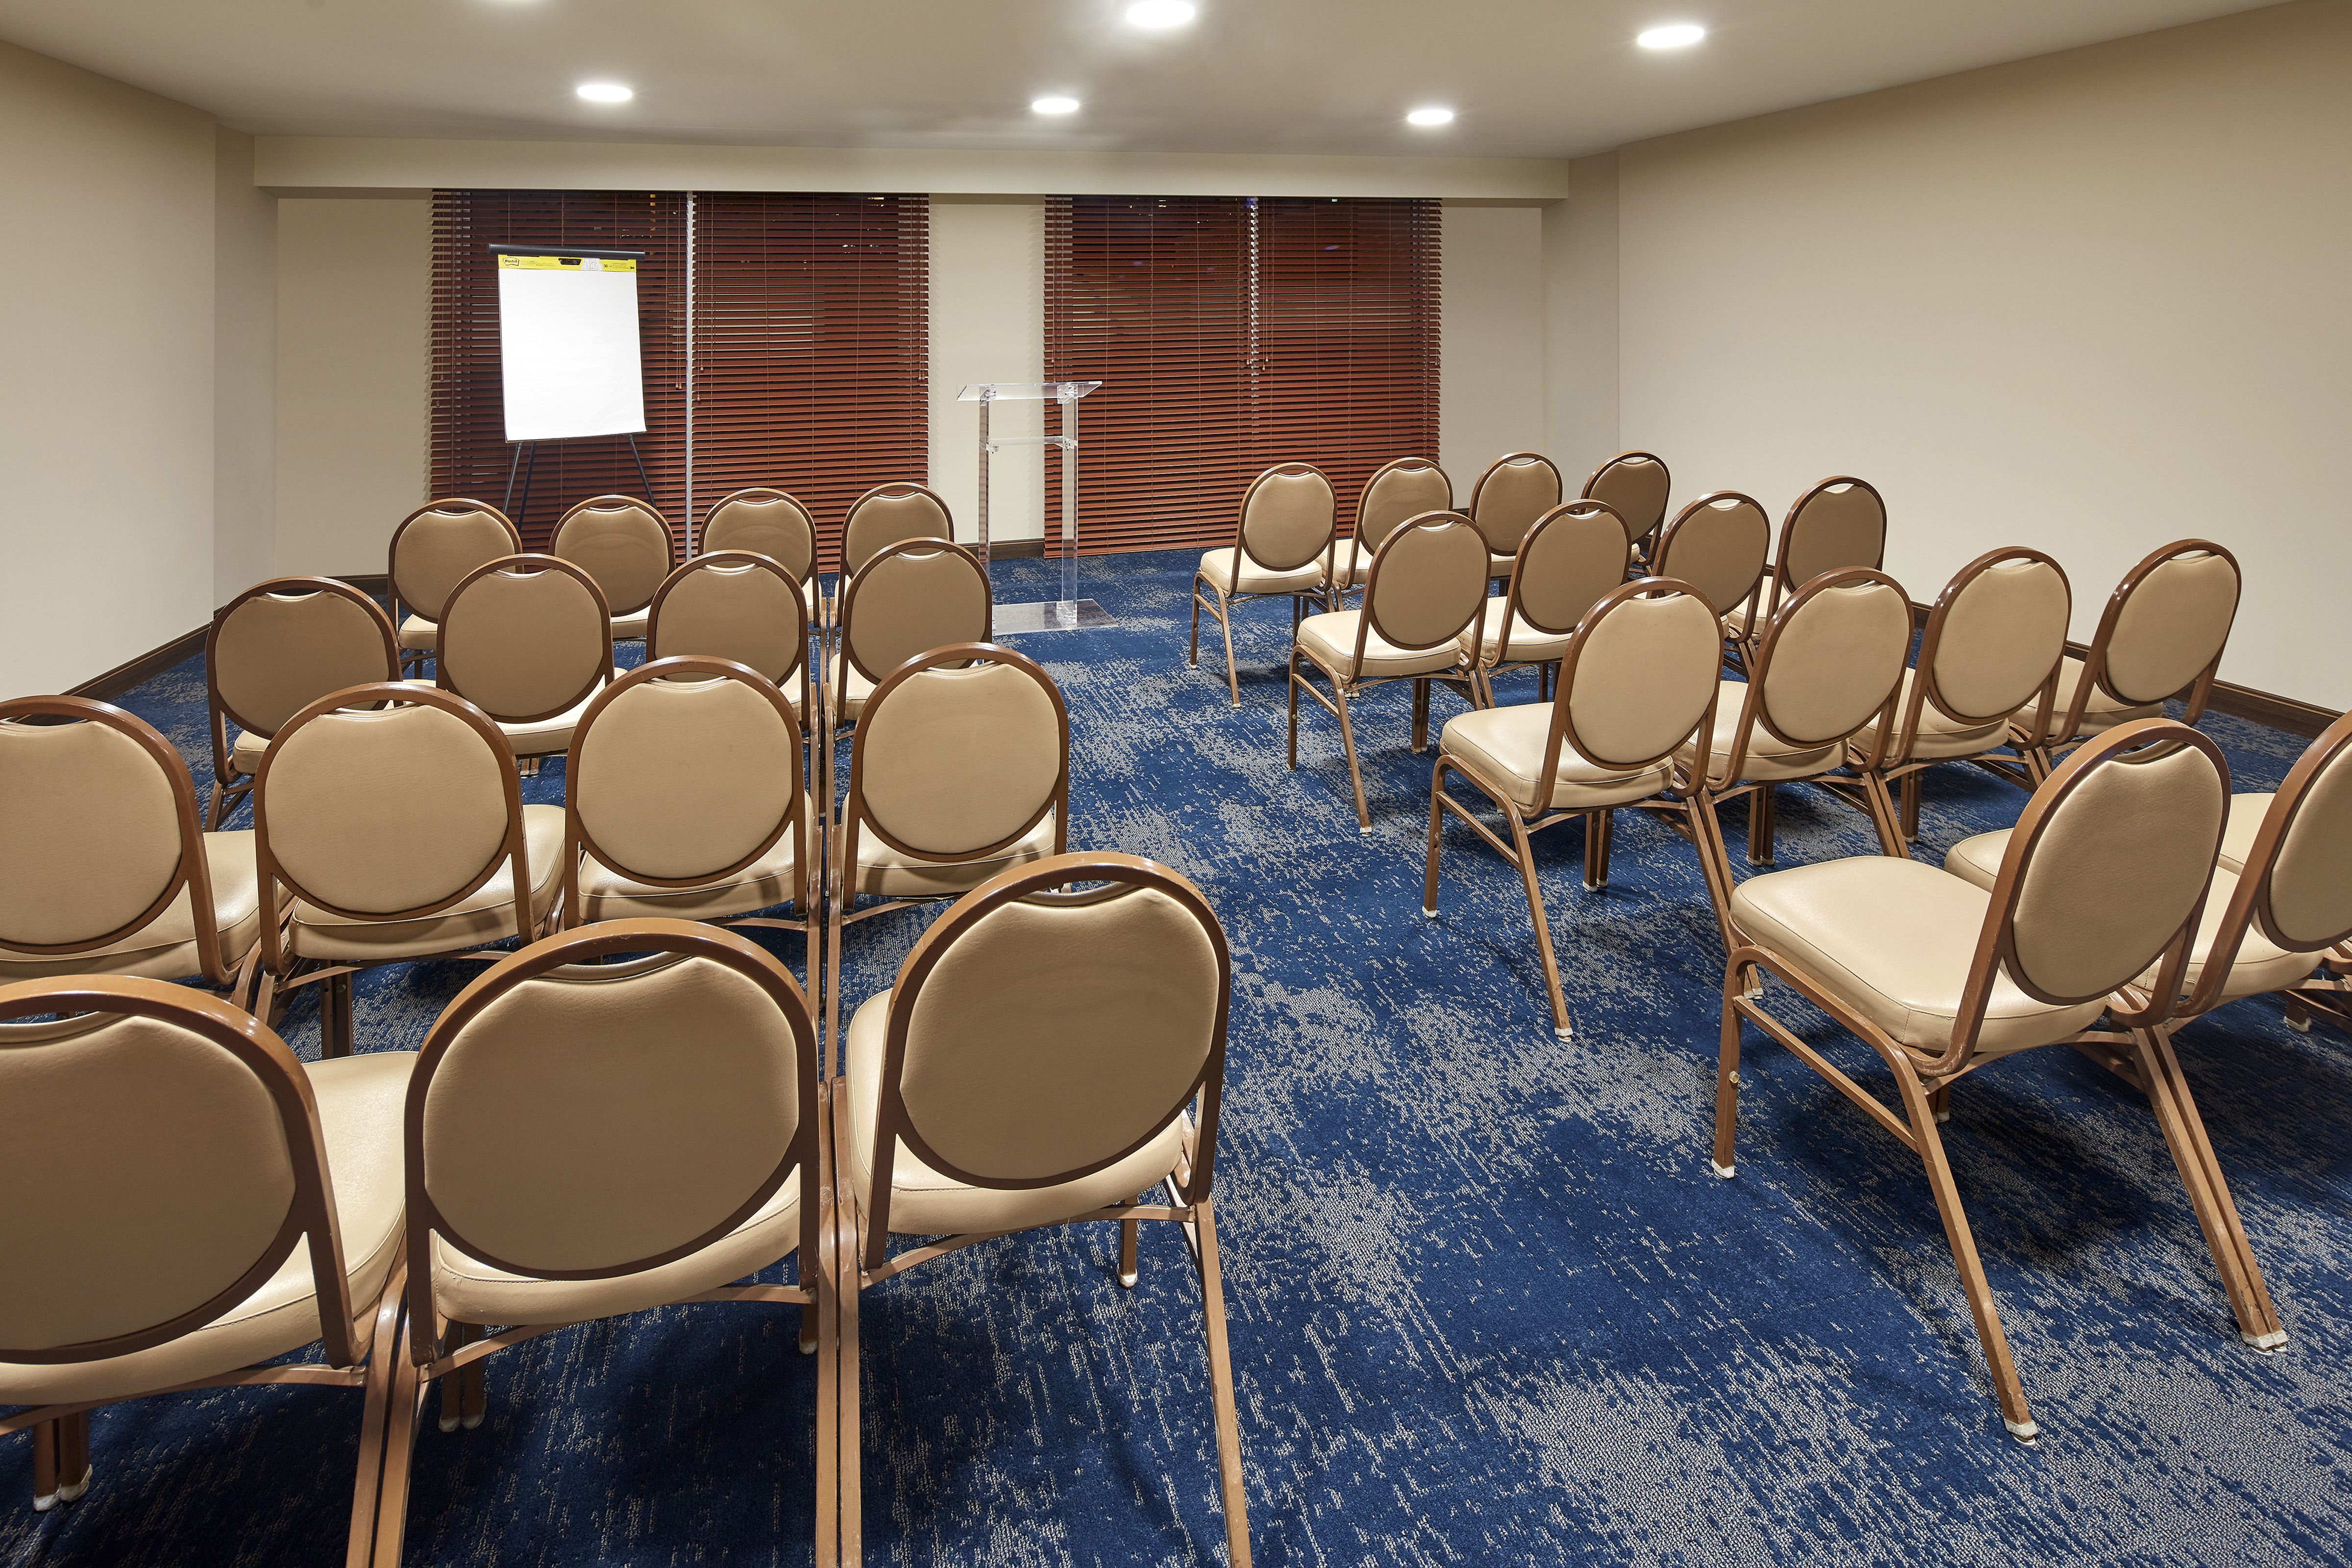 Meeting Room With Theater Seating For 32 Facing Presentation Easel and Podium